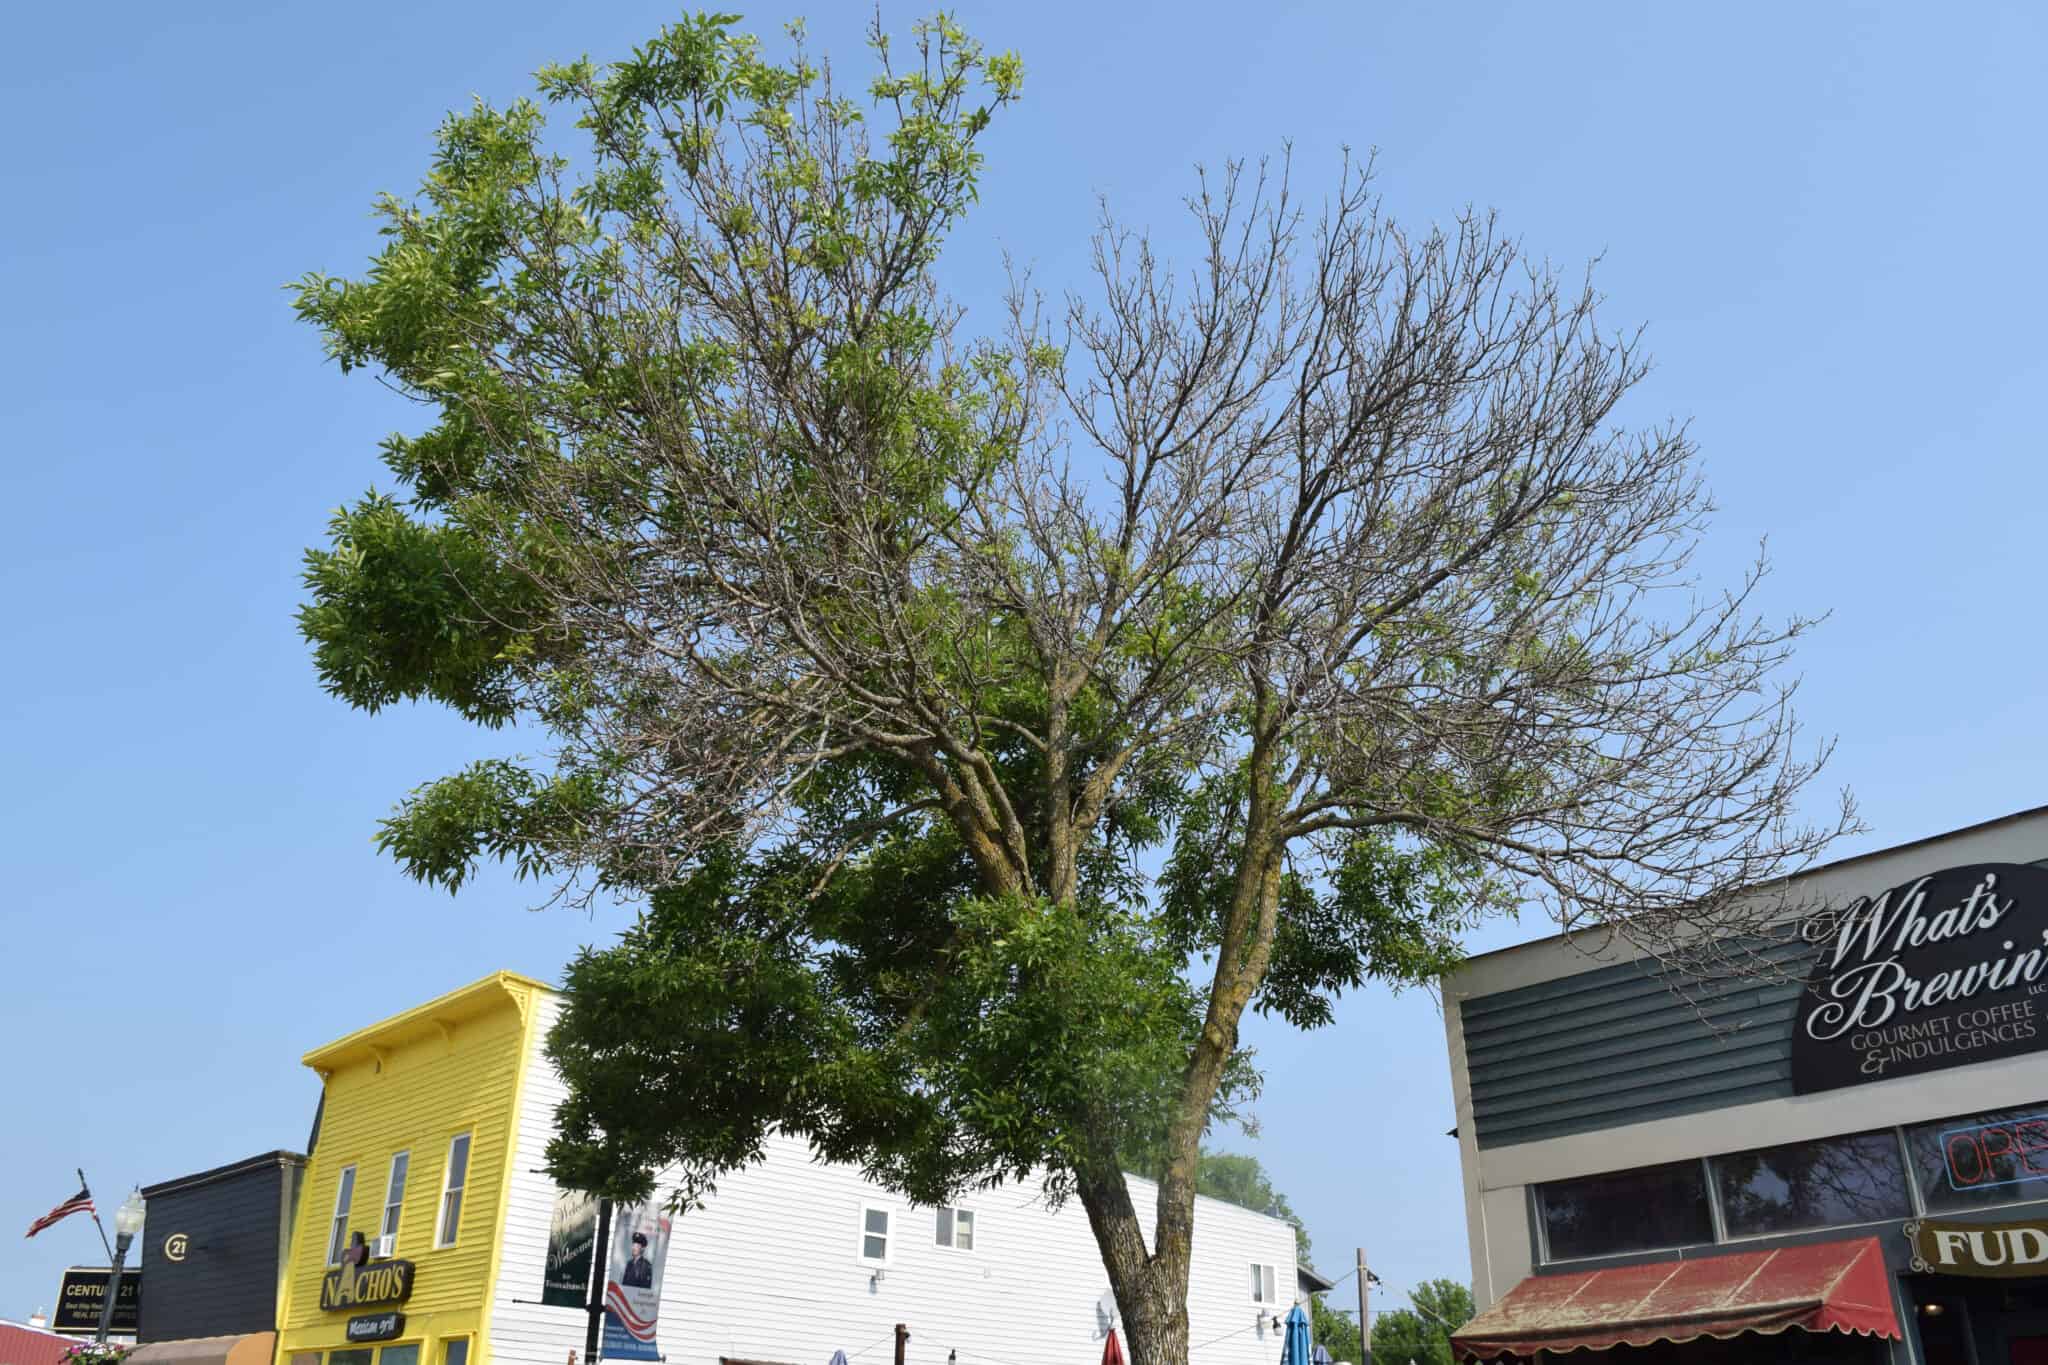 City of Tomahawk to seek DNR grant funds to aid in removing, replacing EAB-impacted ash trees